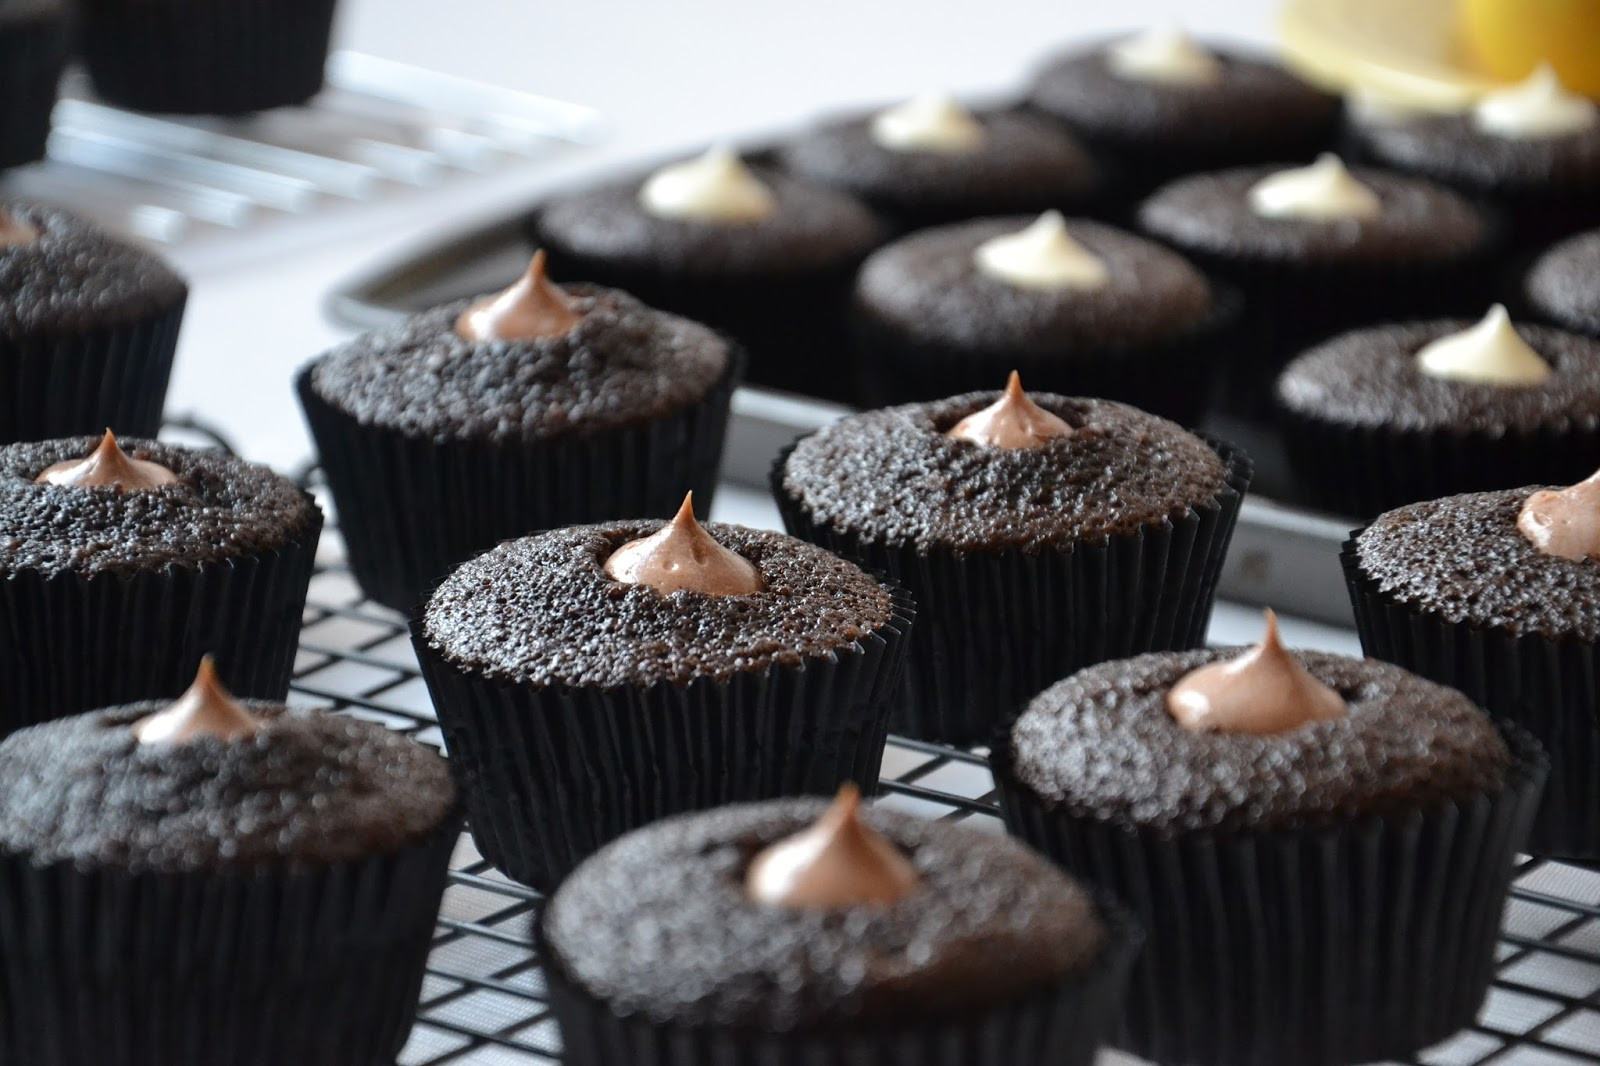 Chocolate Cupcakes With Cream Cheese Filling
 The Sugary Shrink Chocolate Cream Cheese Cupcakes